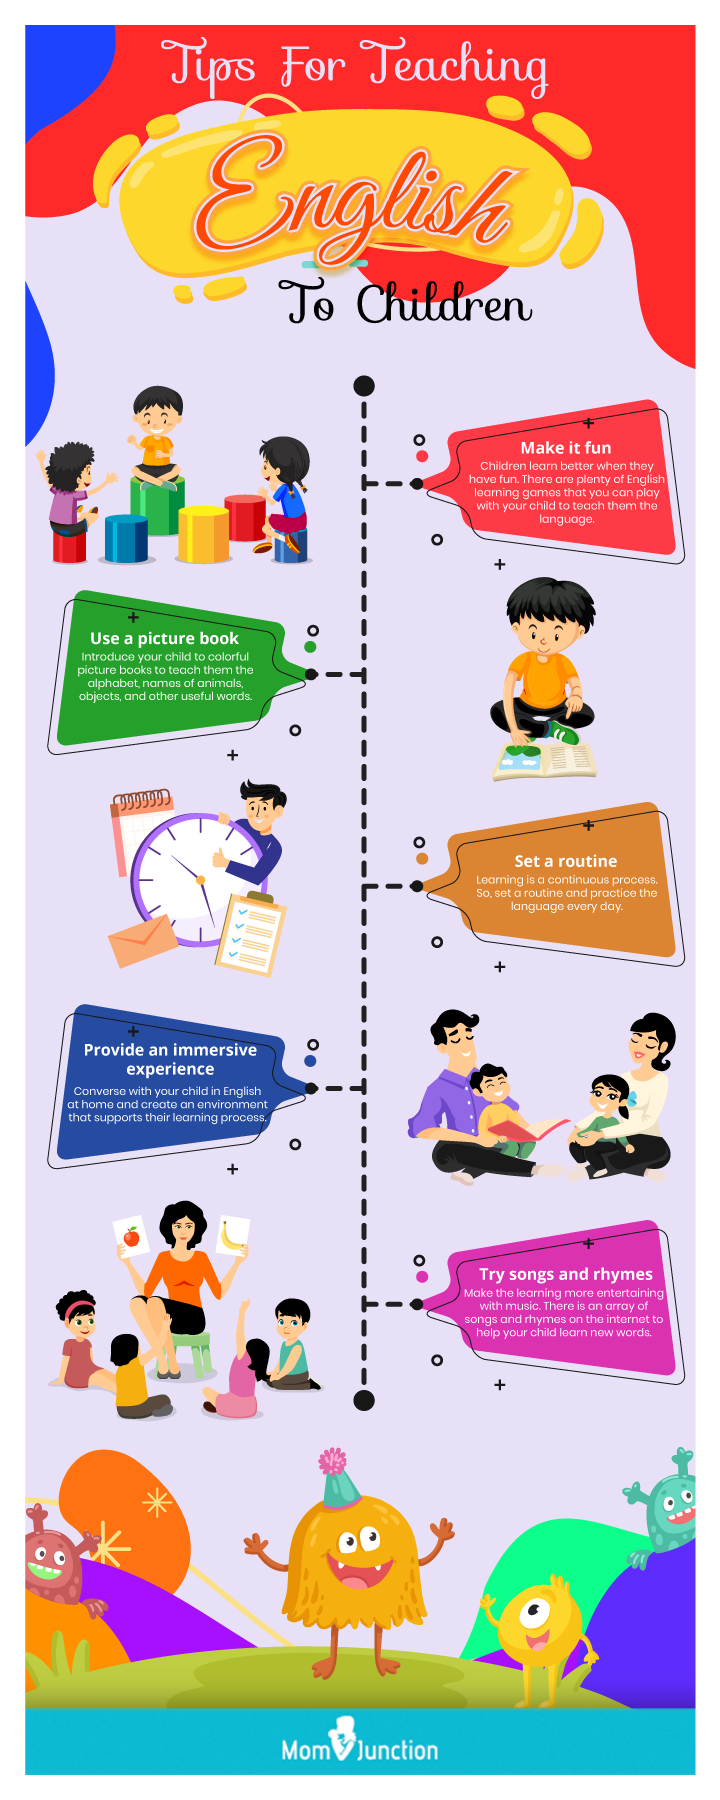 tips for teaching english to children (infographic)